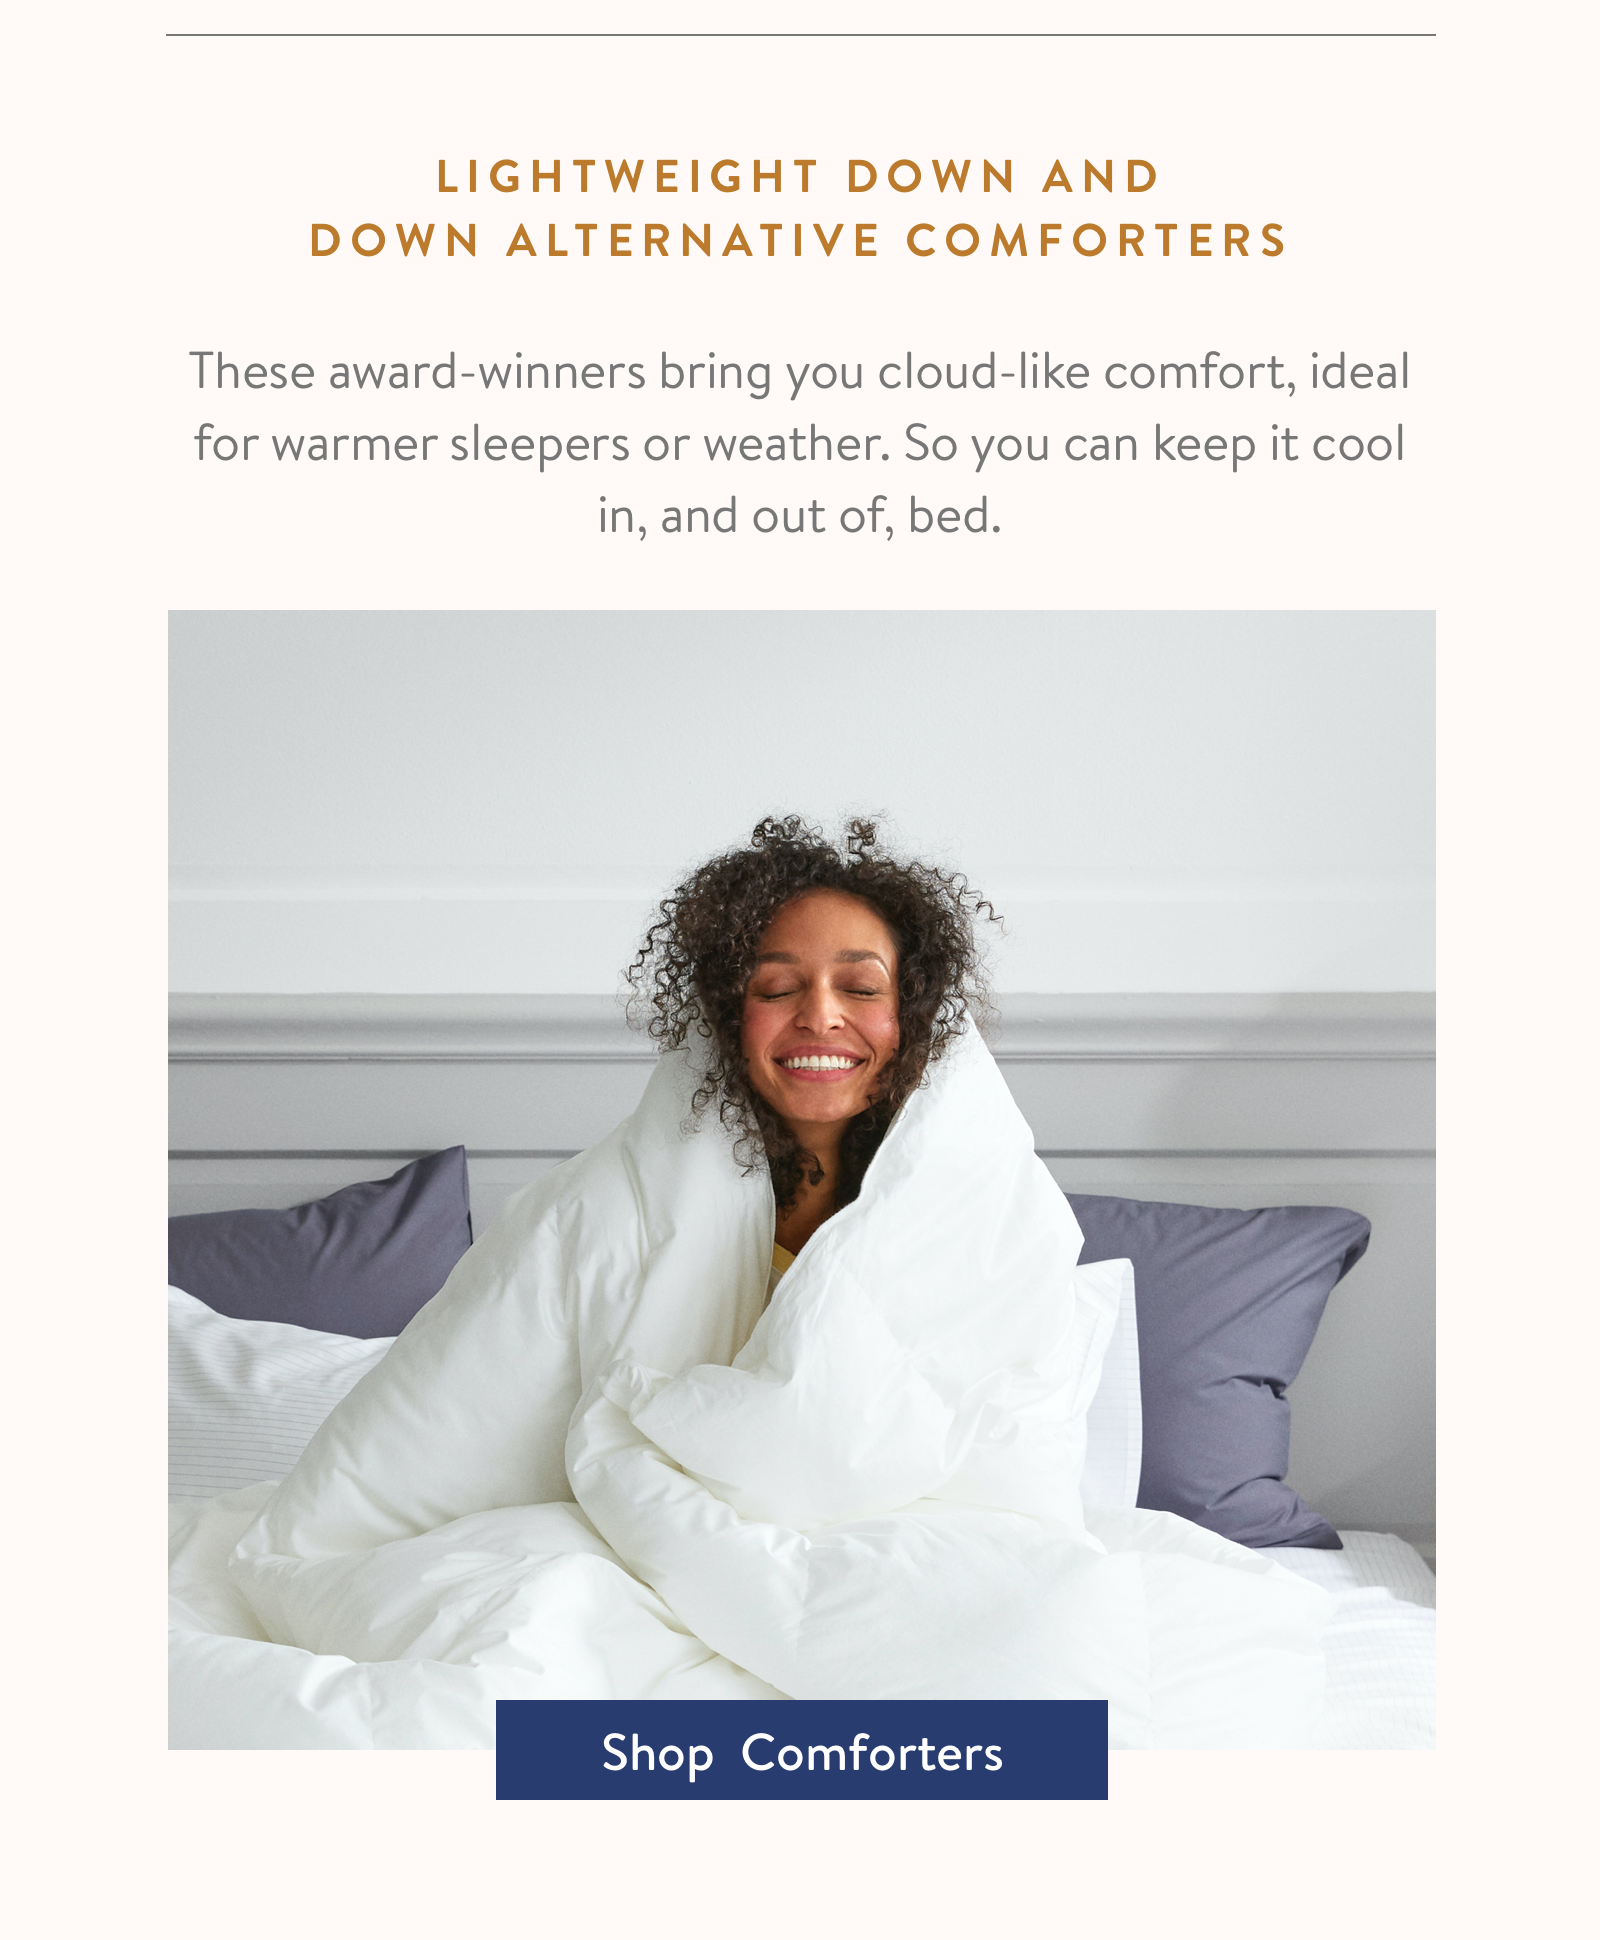 These award-winners bring you cloud-like comfort, ideal for warmer sleepers or weather. So you can keep it cool in, and out of, bed.